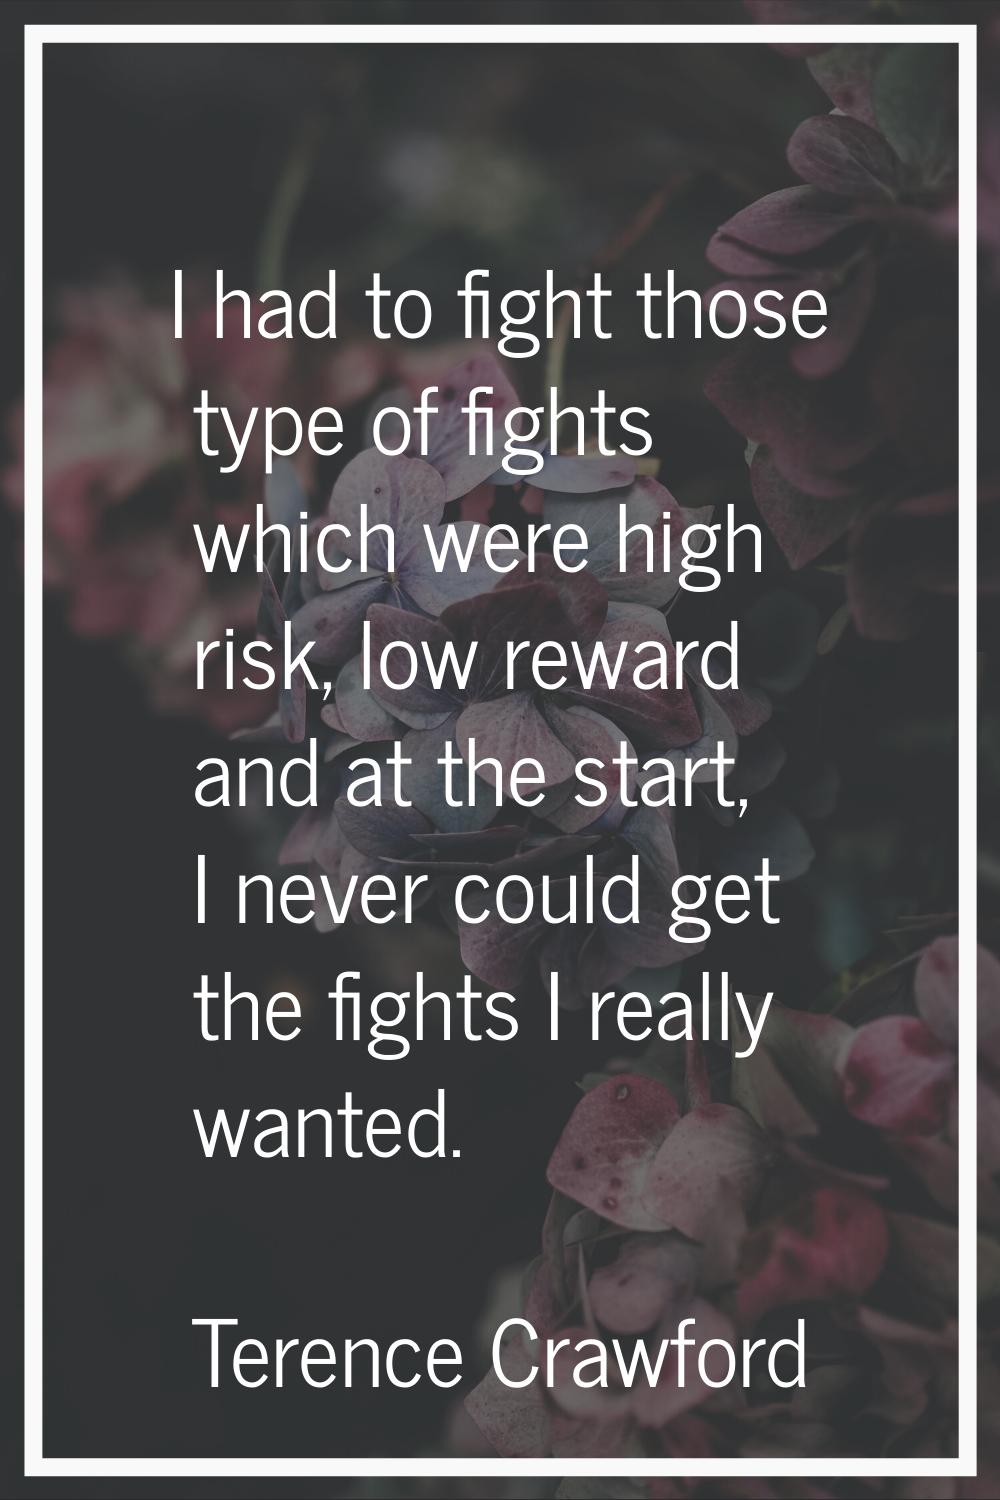 I had to fight those type of fights which were high risk, low reward and at the start, I never coul